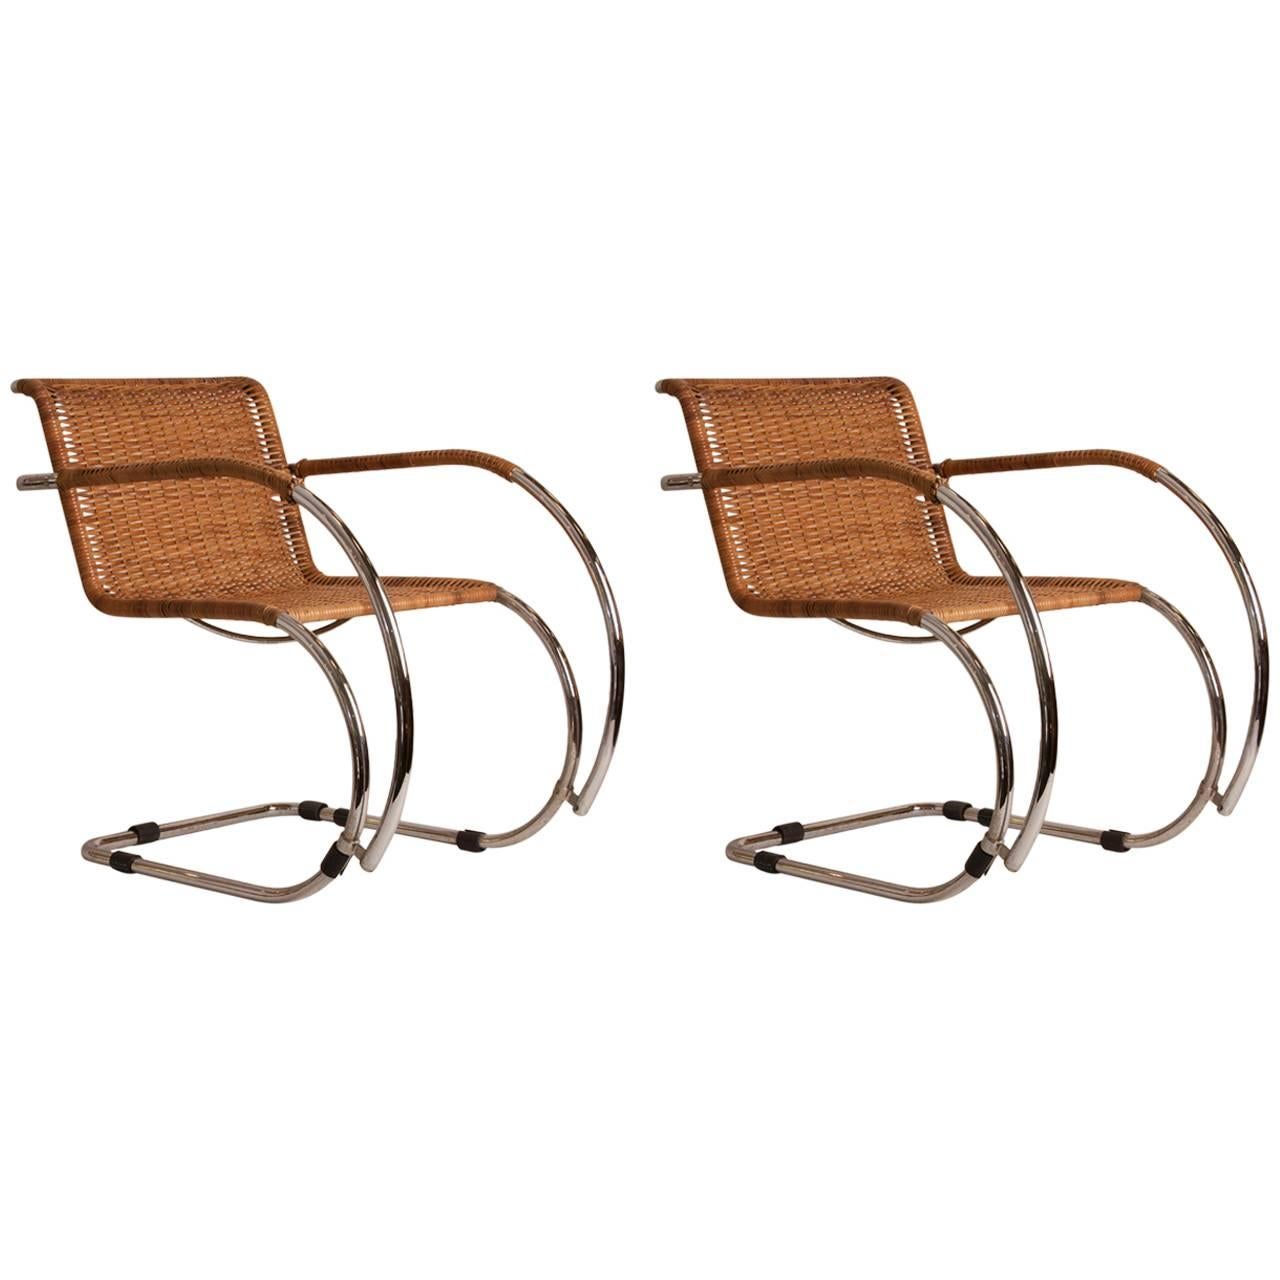 Pair of Mid-Century Mies Van der Rohe MR20 Chairs